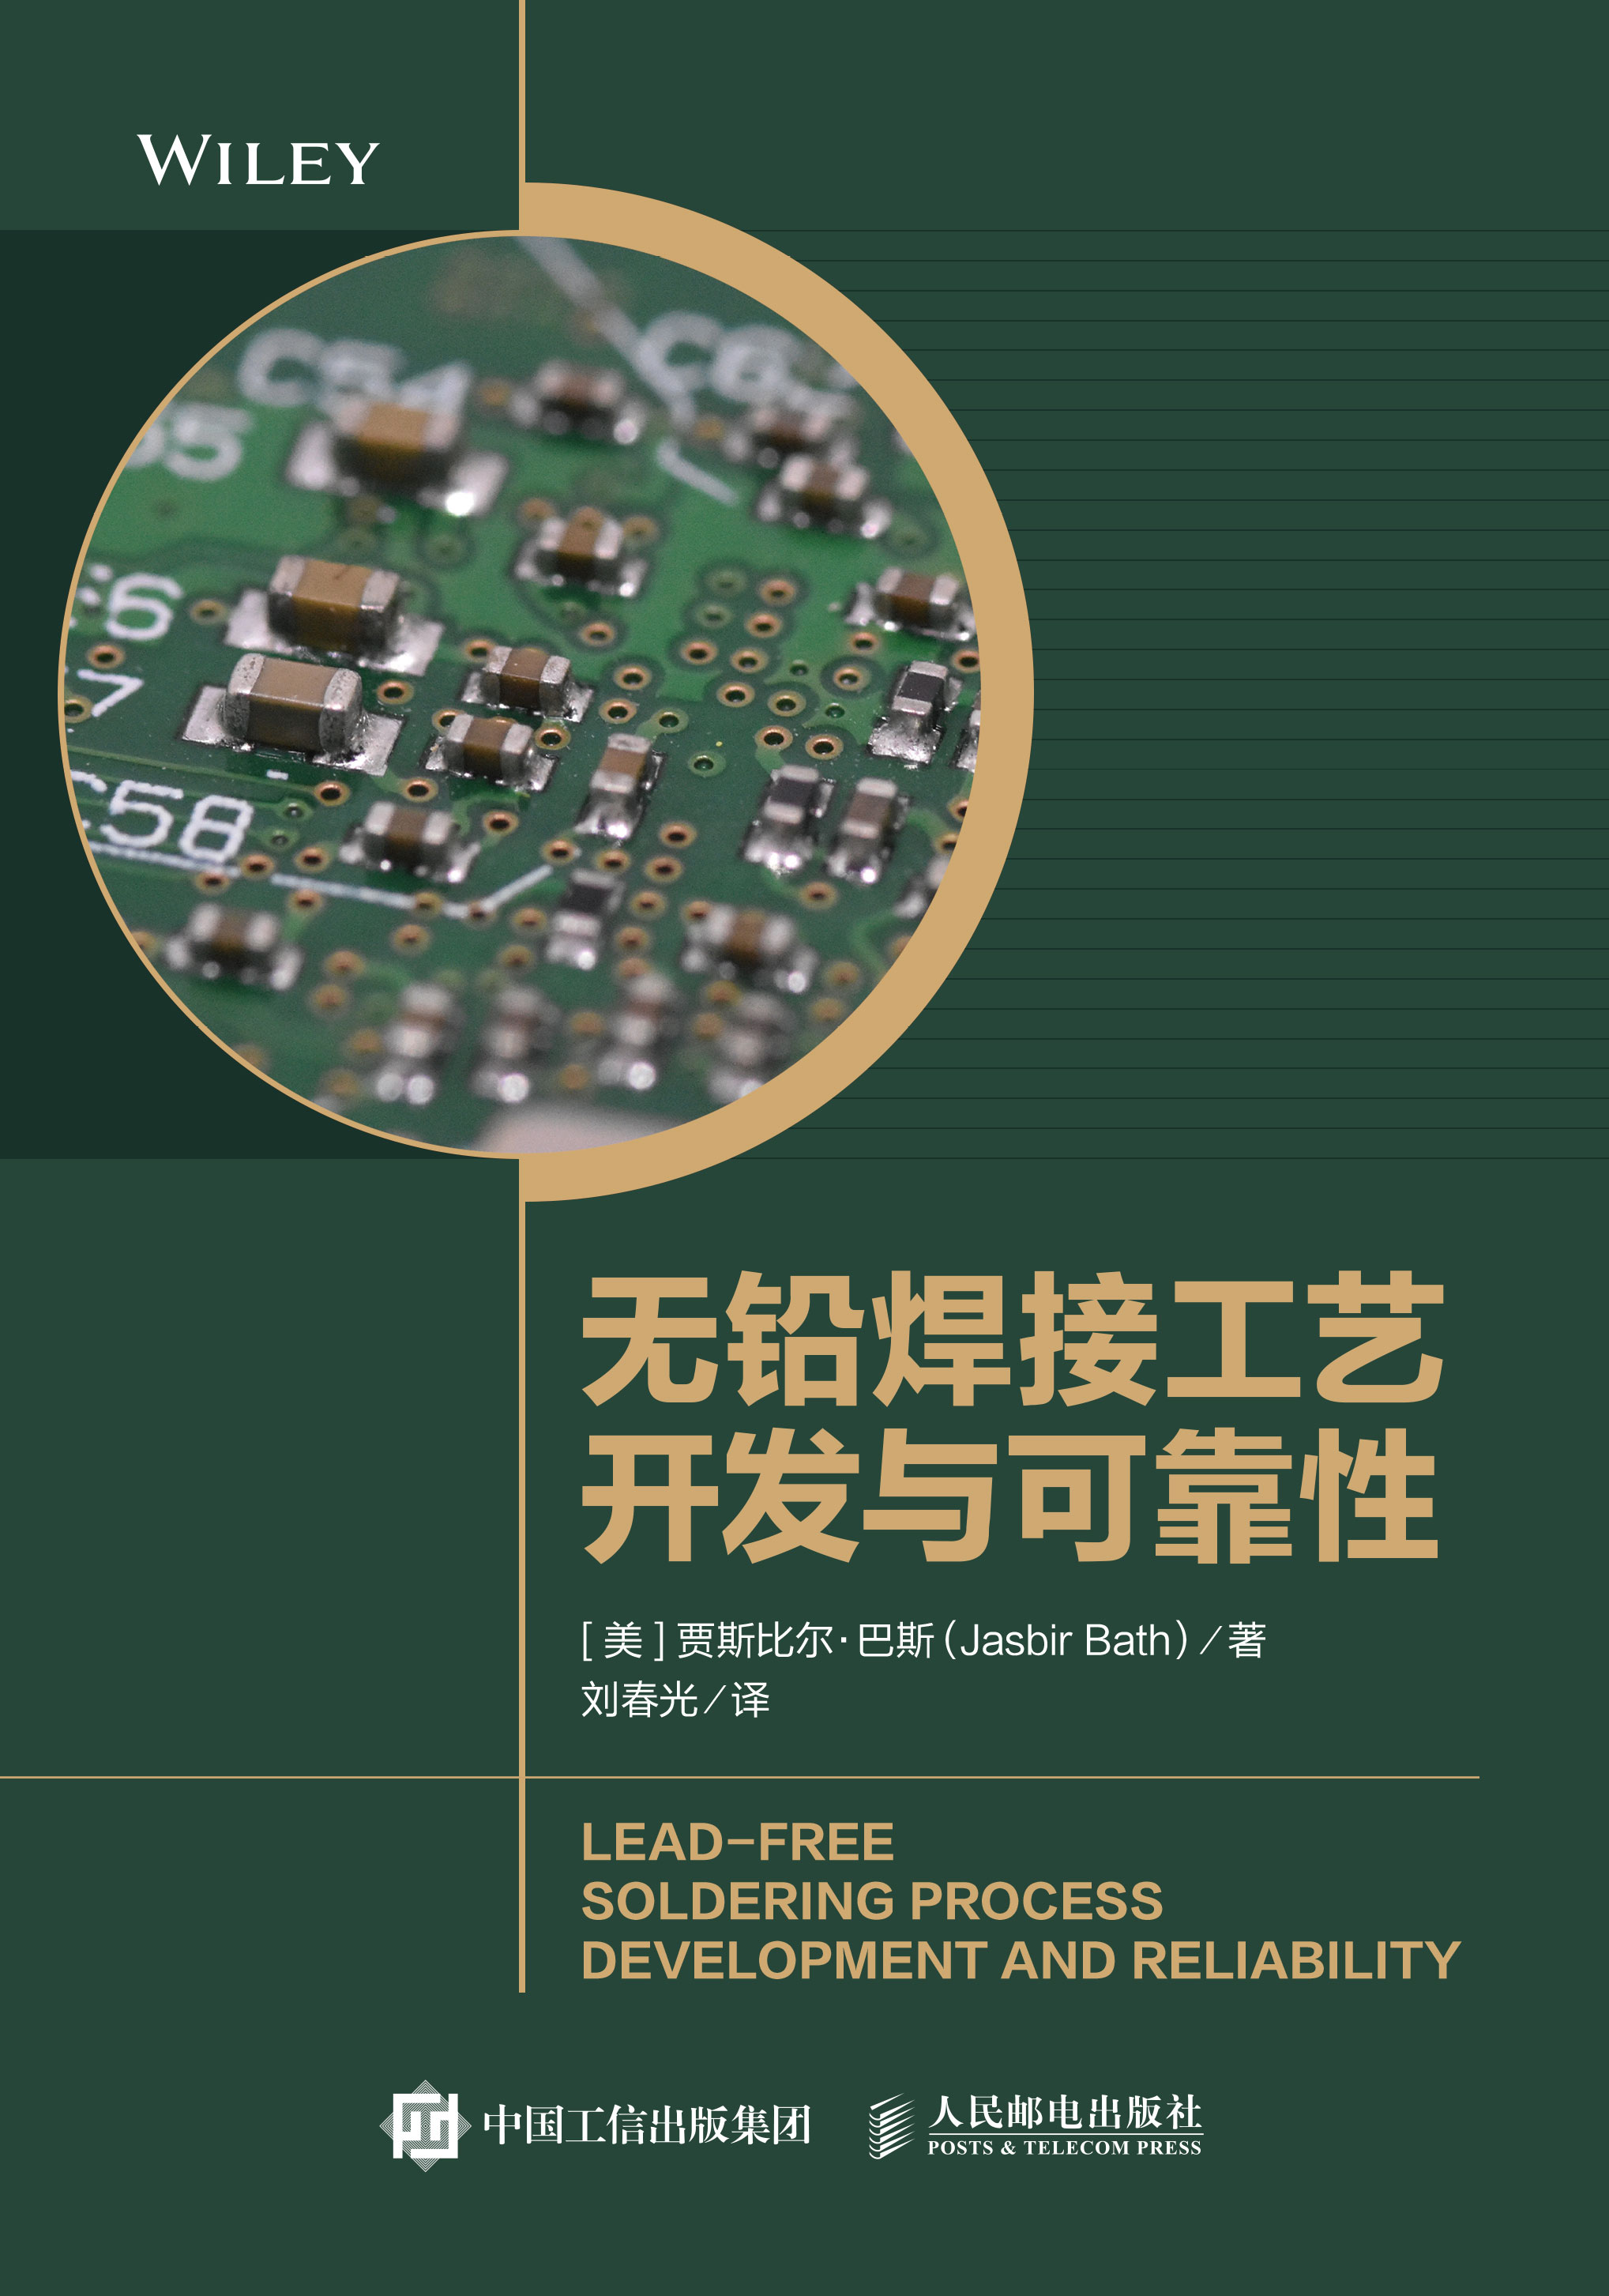 Lead-free Soldering Process Development and Reliability - Chinese Version